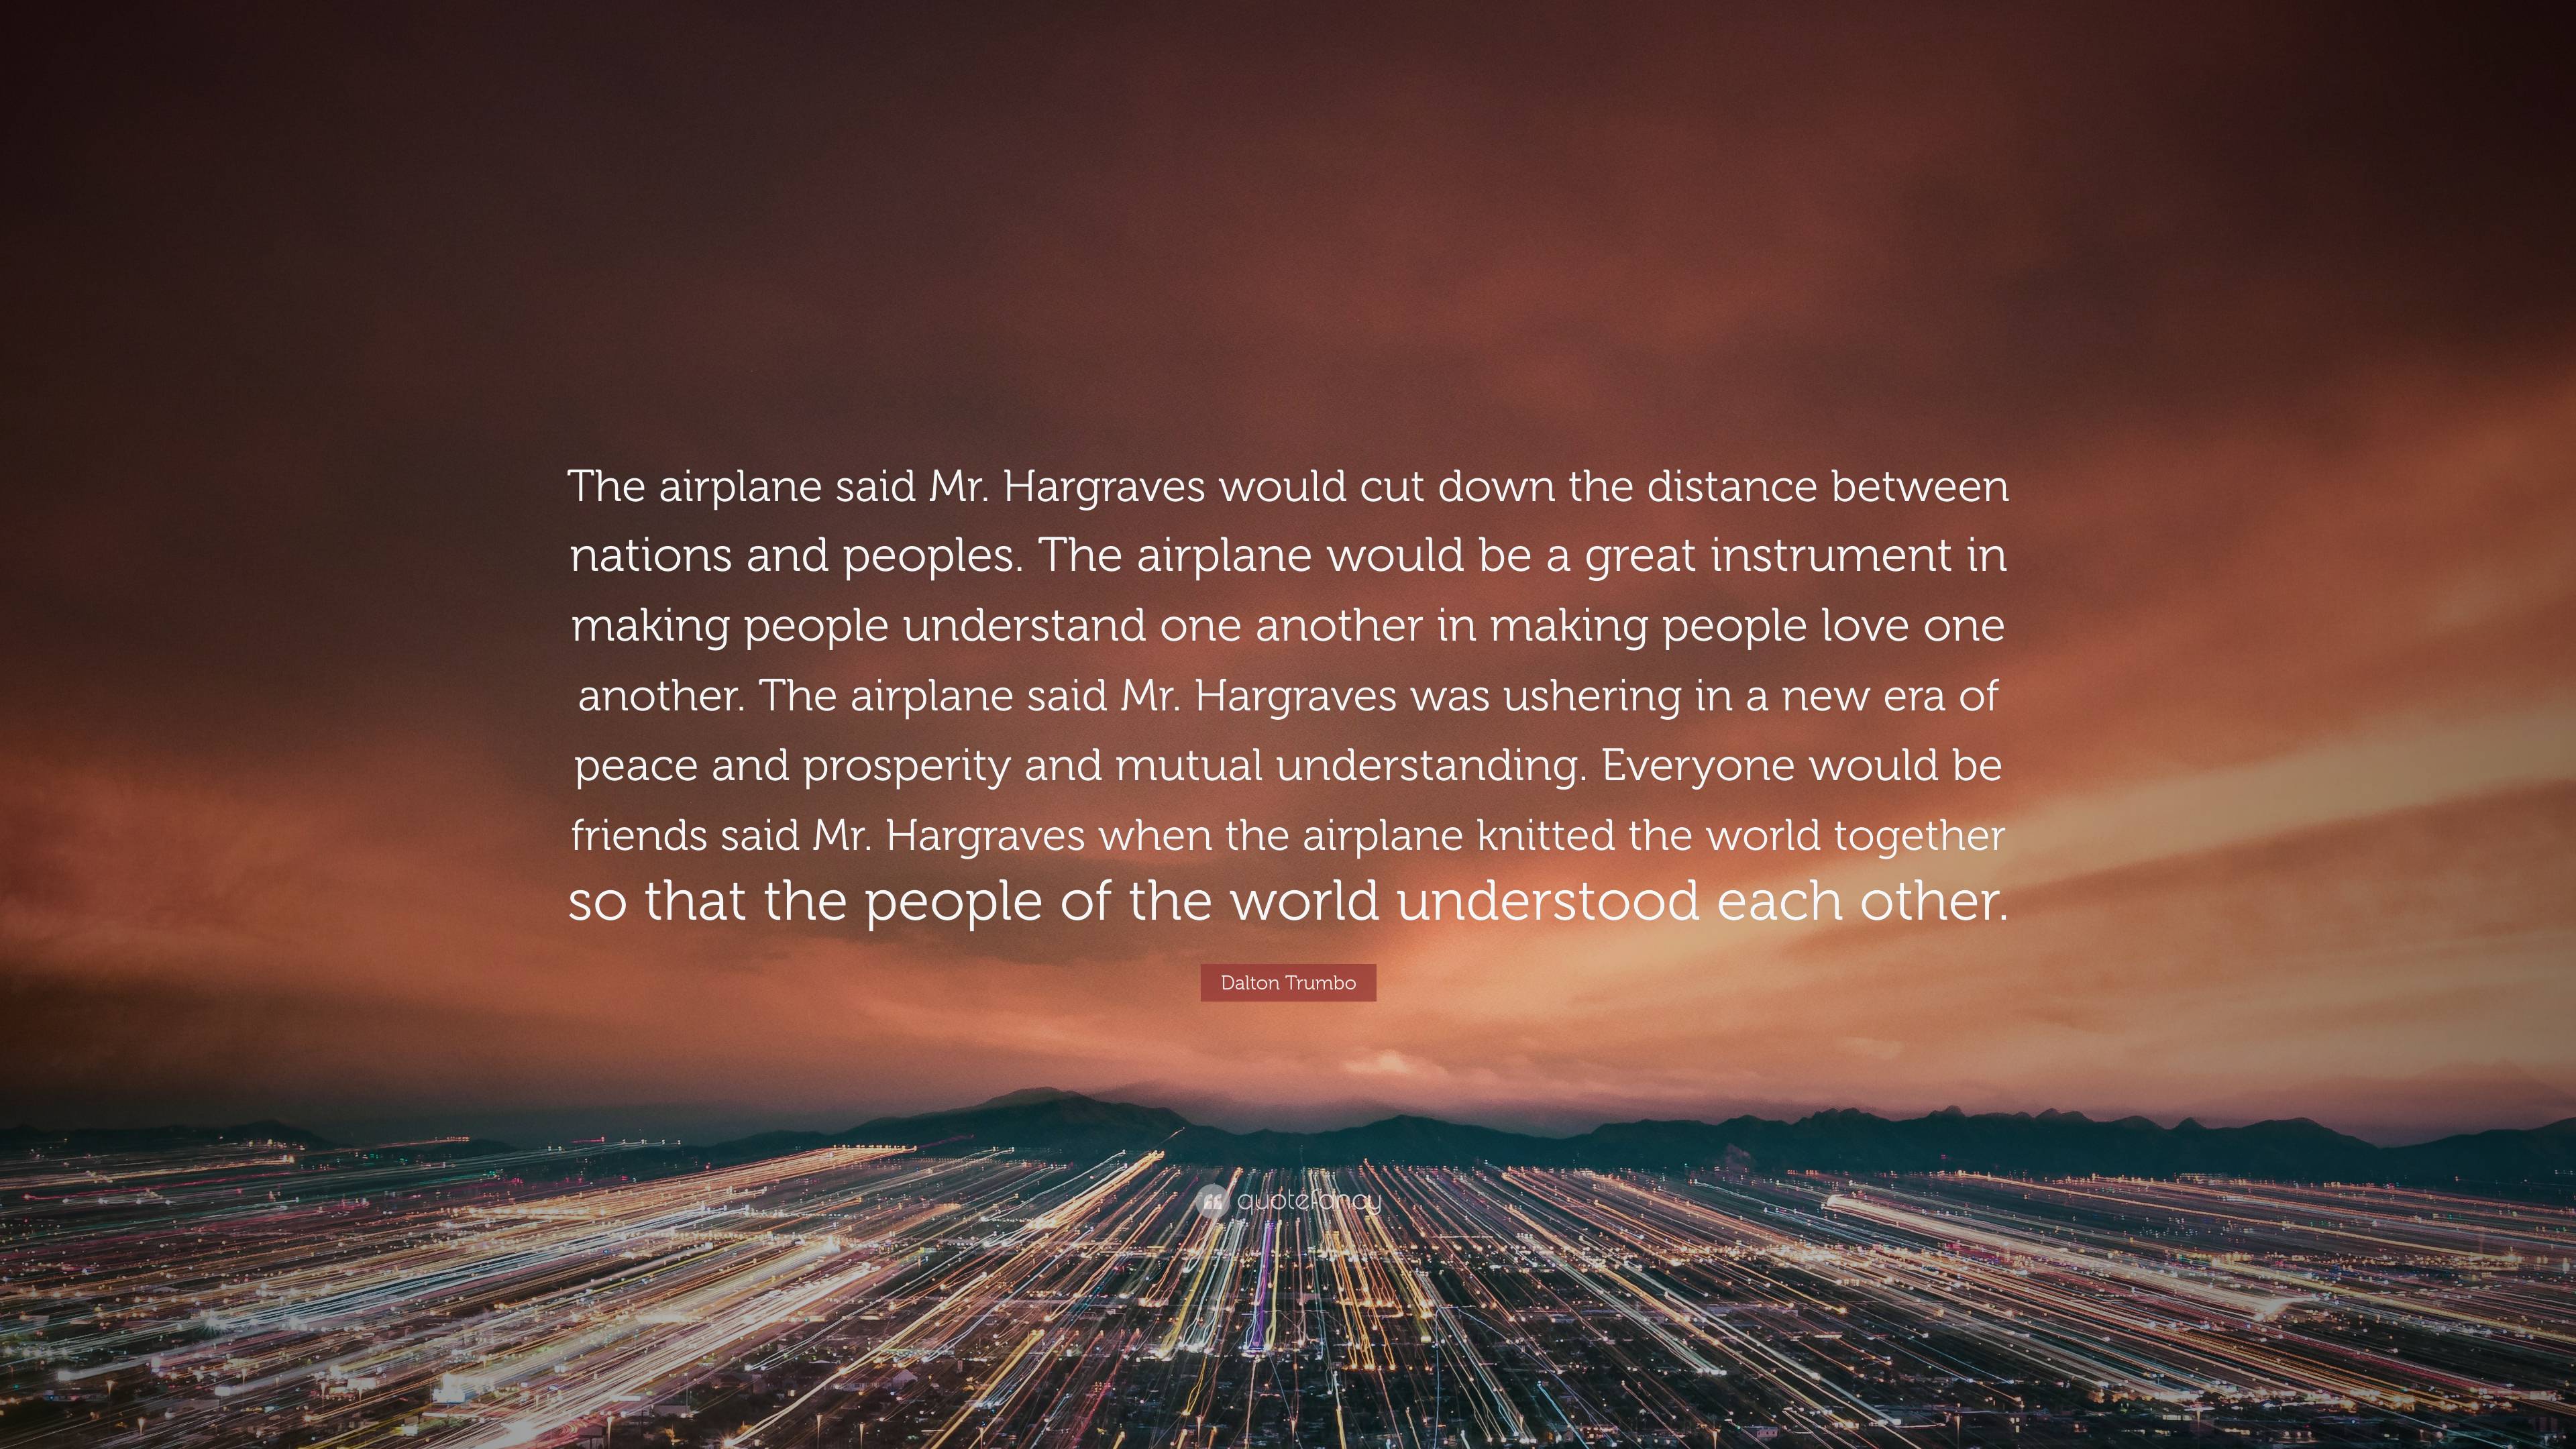 Dalton Trumbo Quote: “The airplane said Mr. Hargraves would cut down ...